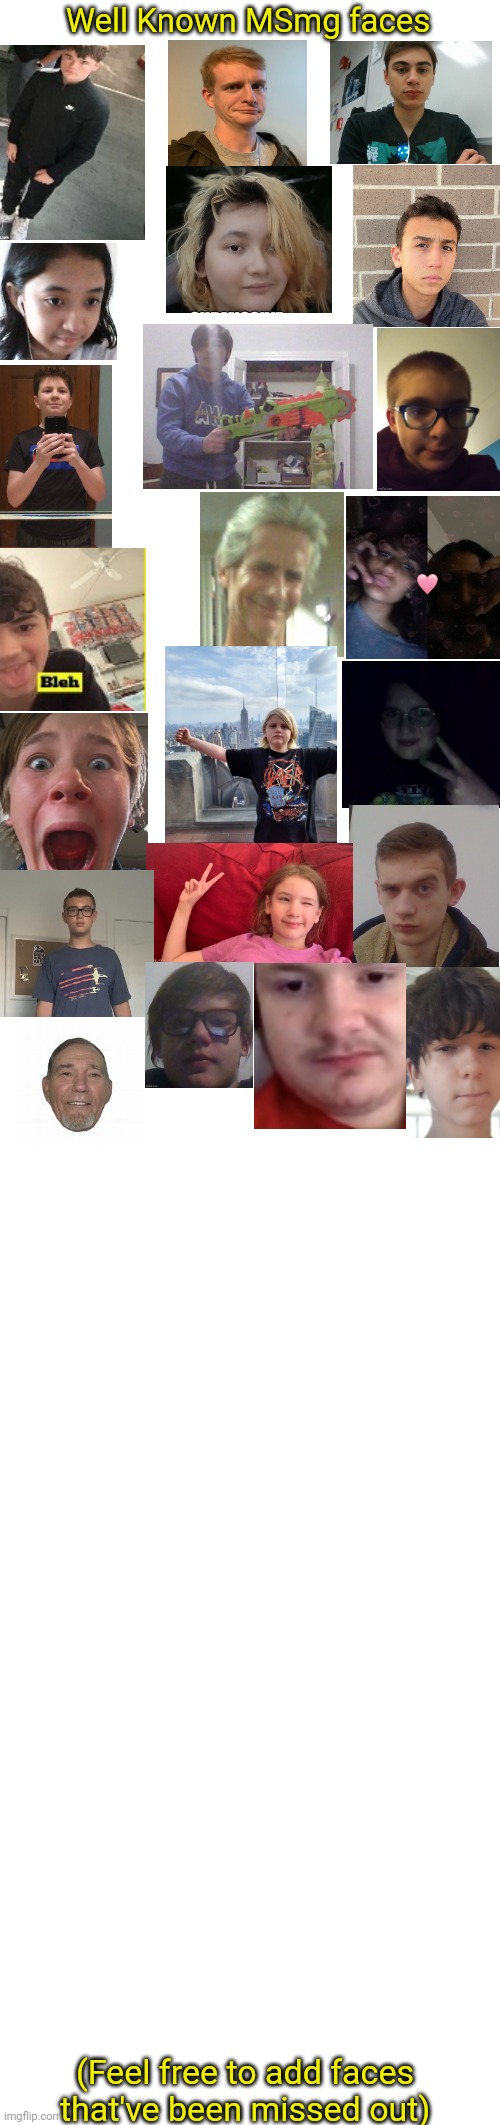 Well Known MSmg faces; (Feel free to add faces that've been missed out) | image tagged in memes,blank transparent square | made w/ Imgflip meme maker